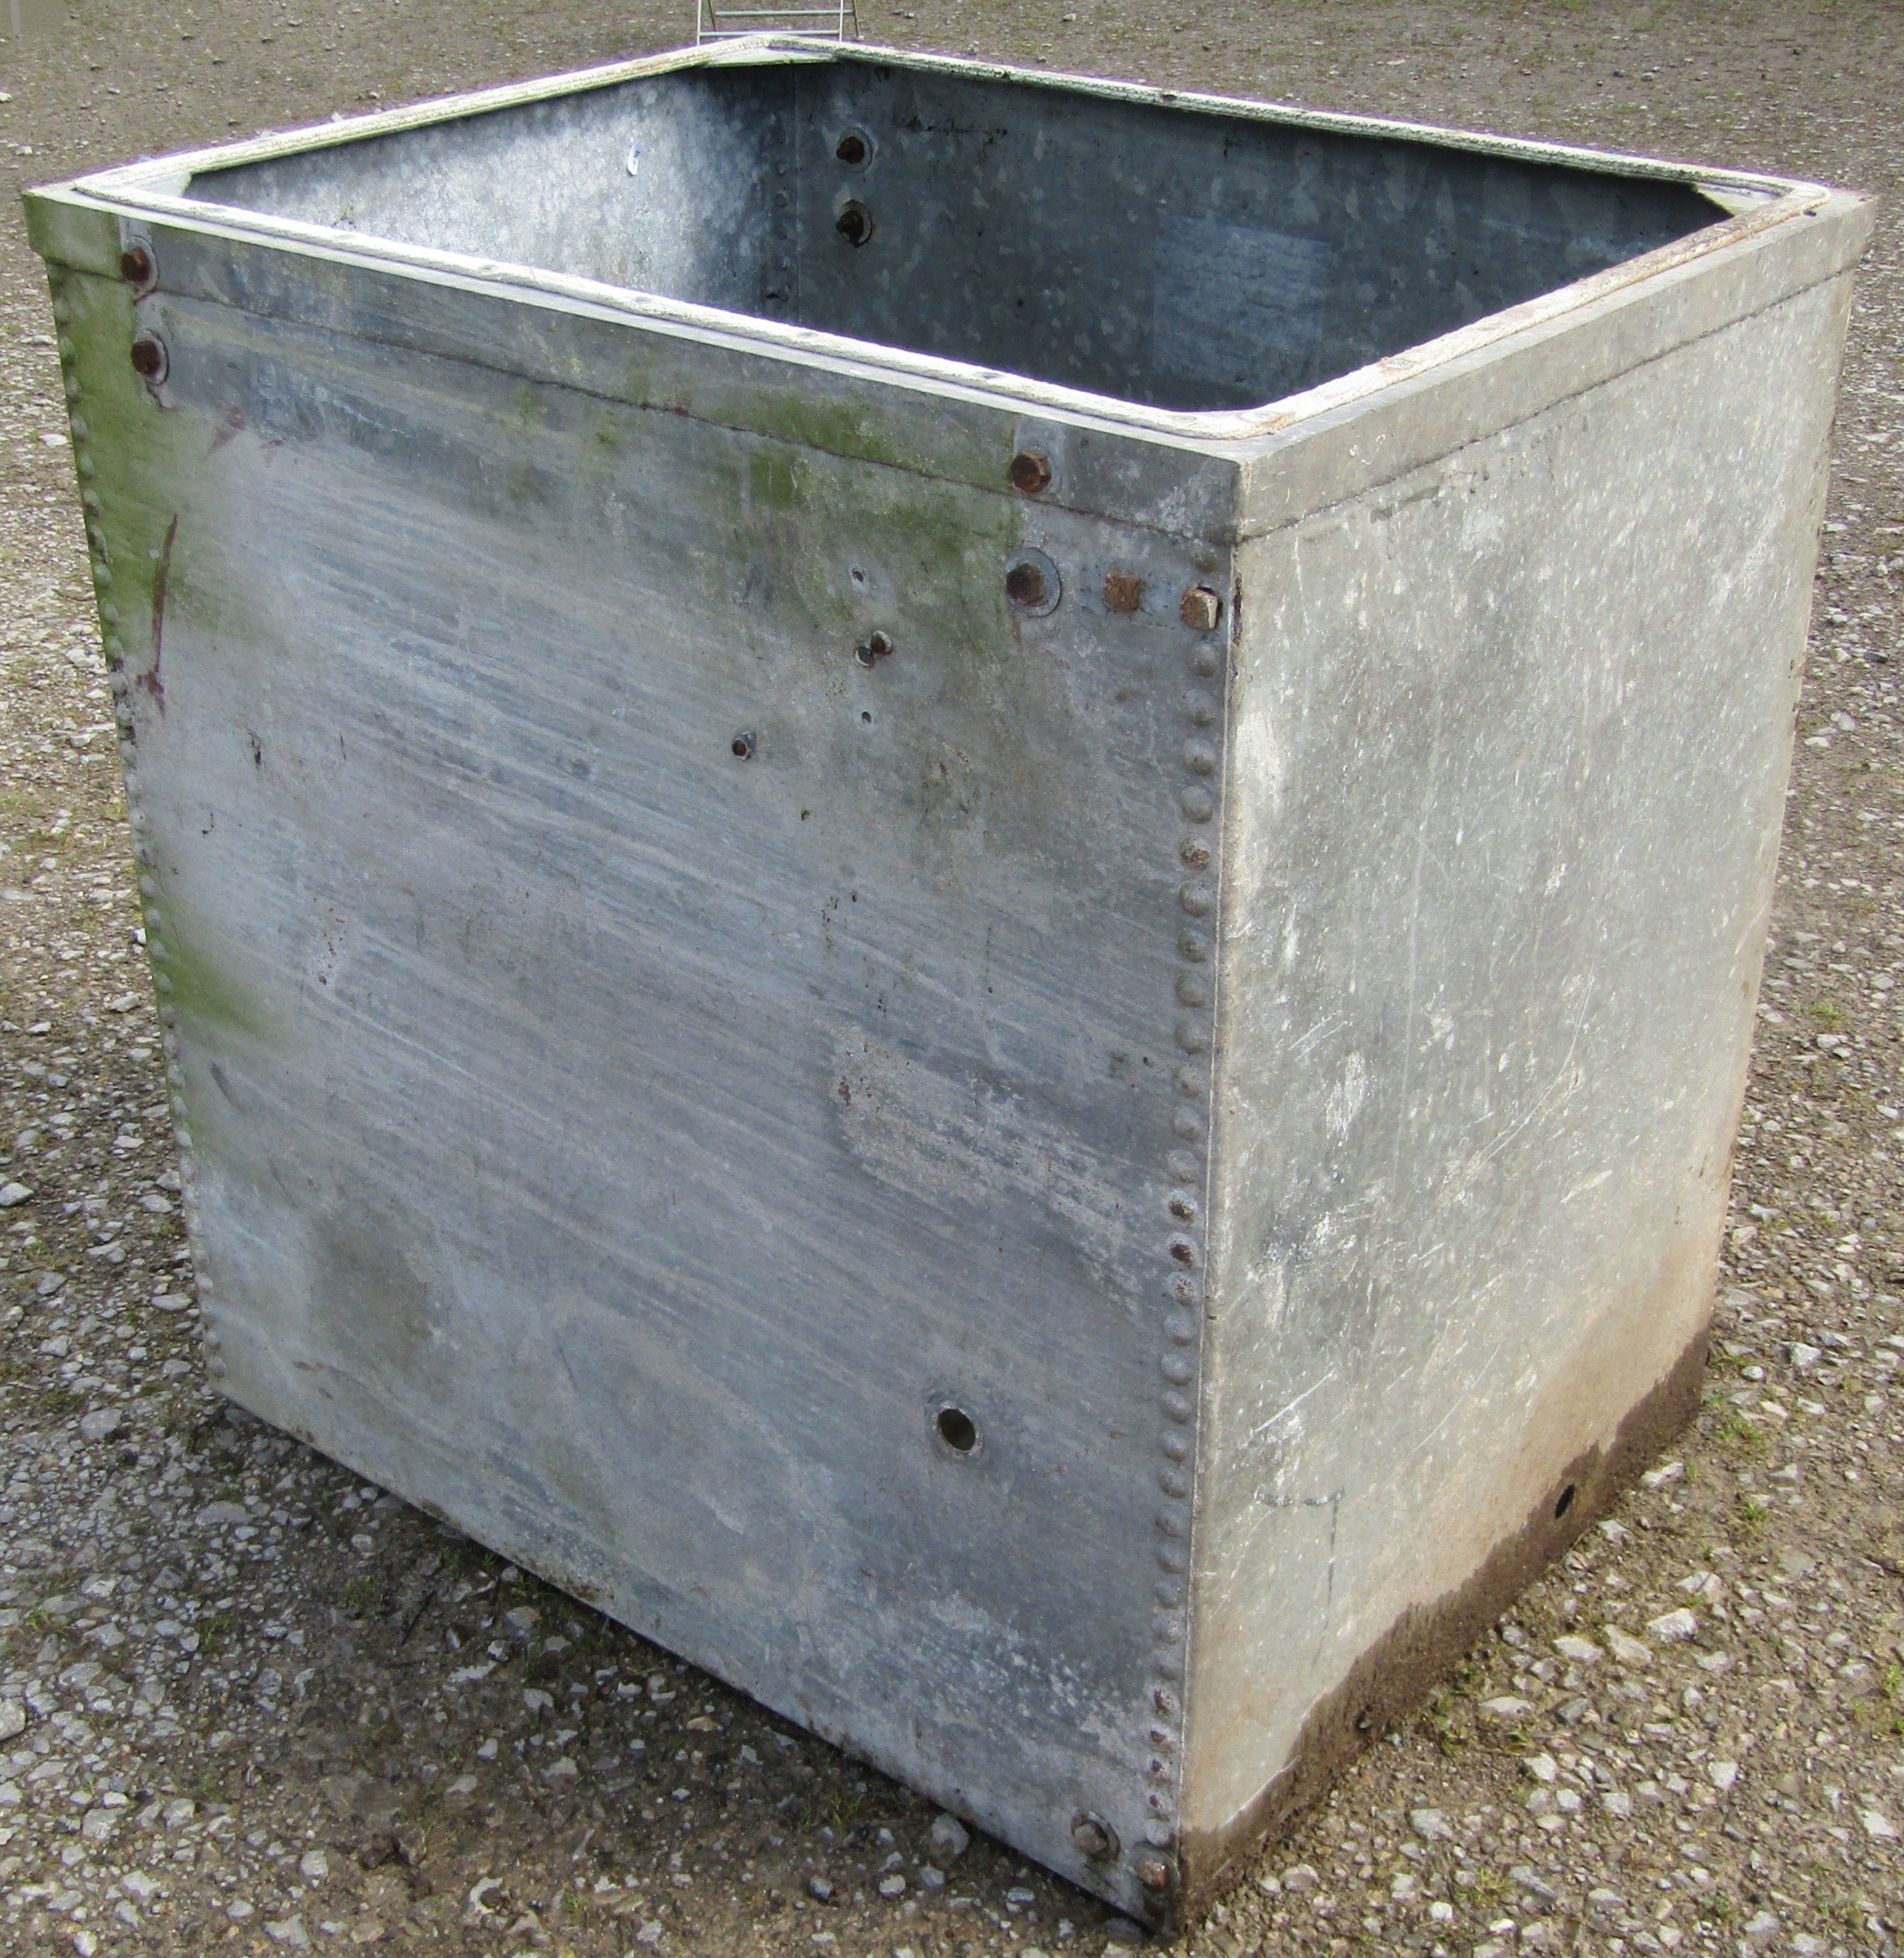 A vintage heavy gauge galvanised steel tank of rectangular form with pop riveted seams, 92 cm high x - Image 2 of 4